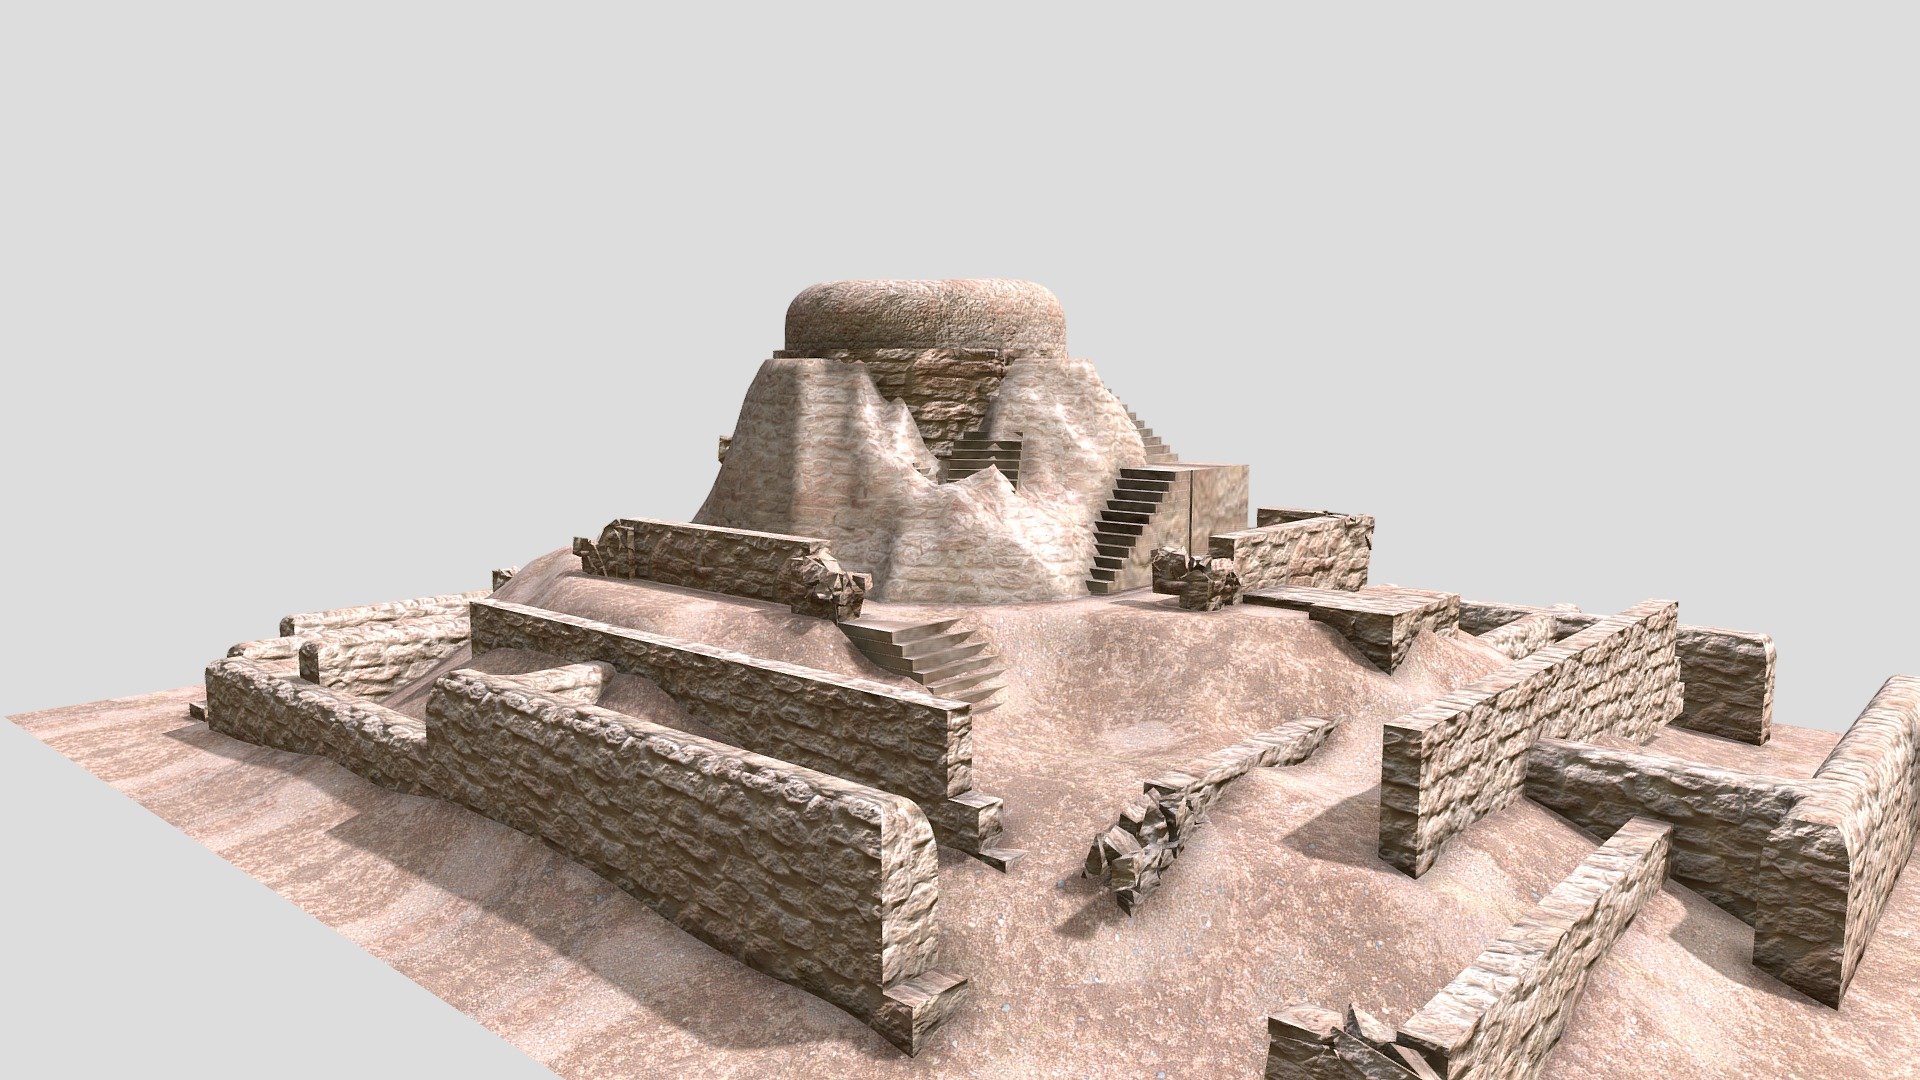 The city of Mohenjo Daro, a view of the citadel with the grid system 3d model